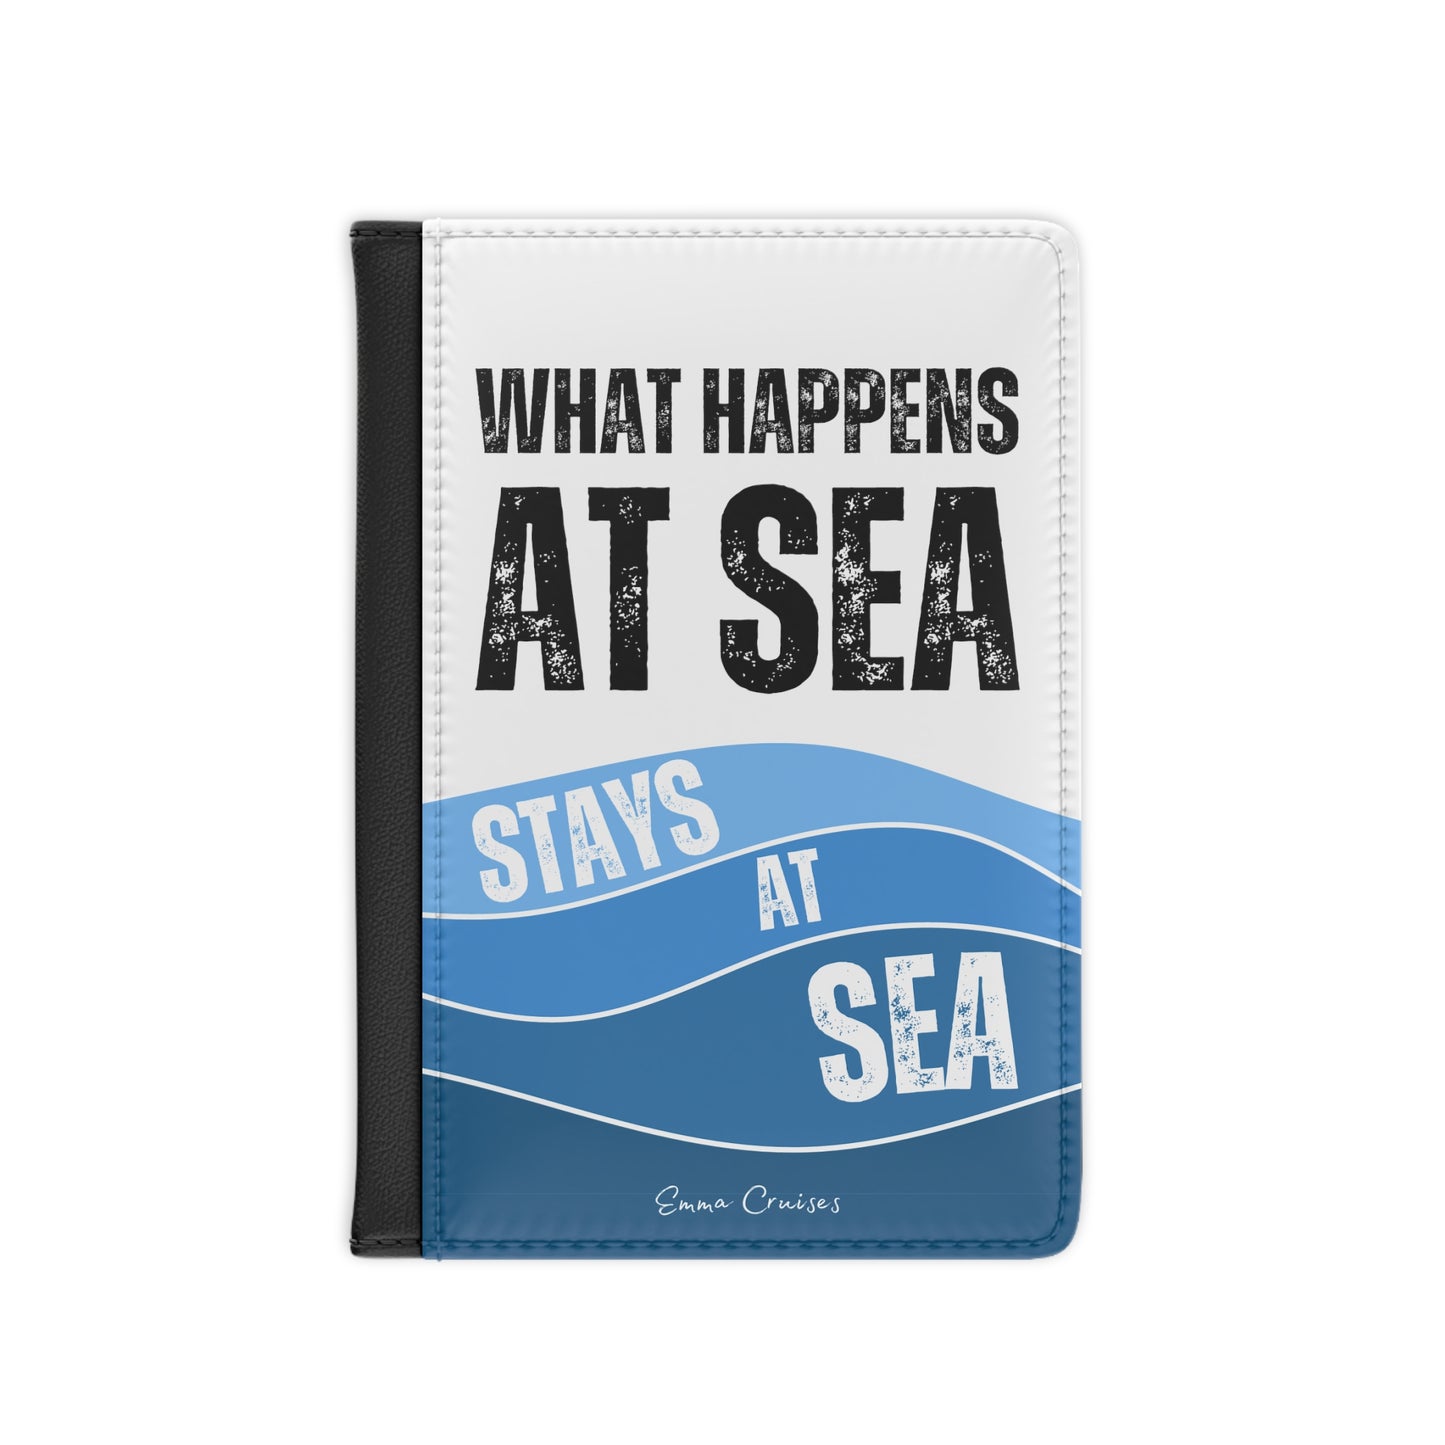 What Happens at Sea - Passport Cover